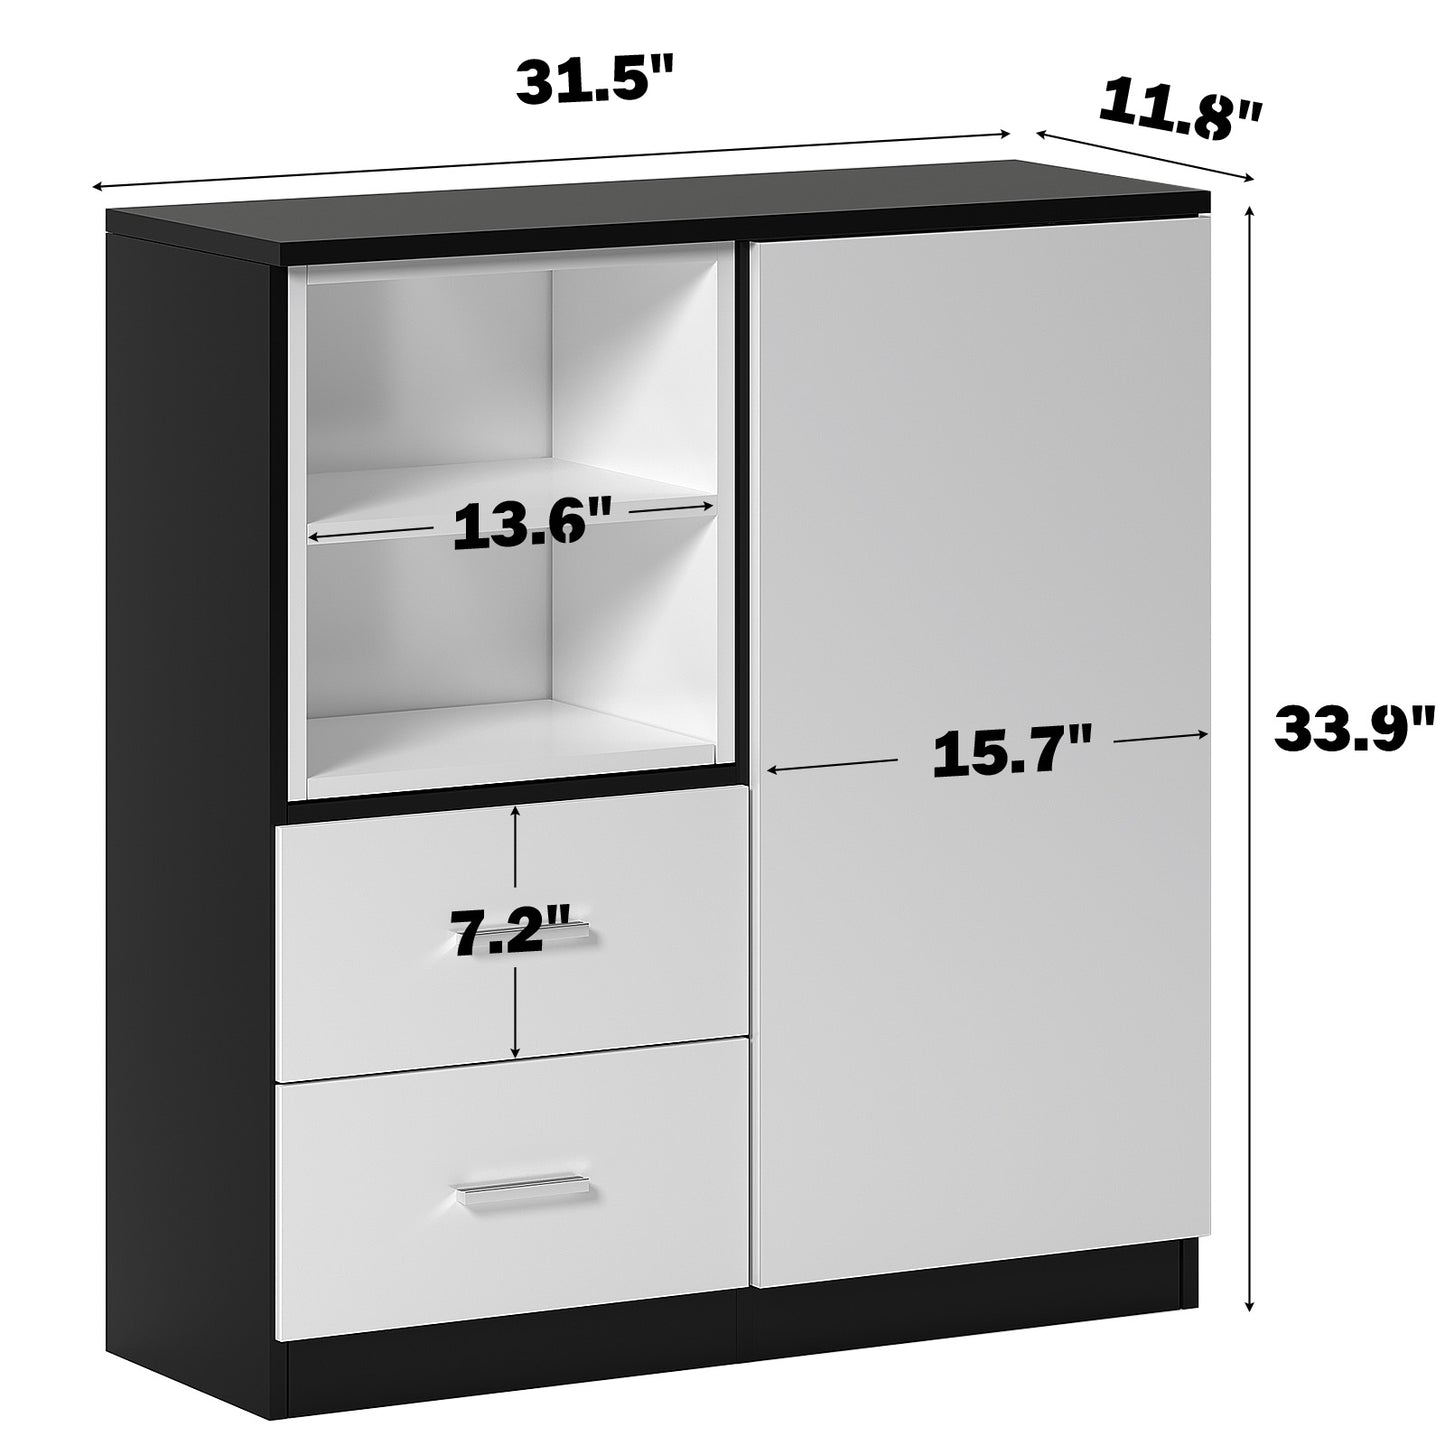 Soges Modern Minimalist Design of Lockable Lockers and File Cabinets with Durable Moving Wheels for Office, Study